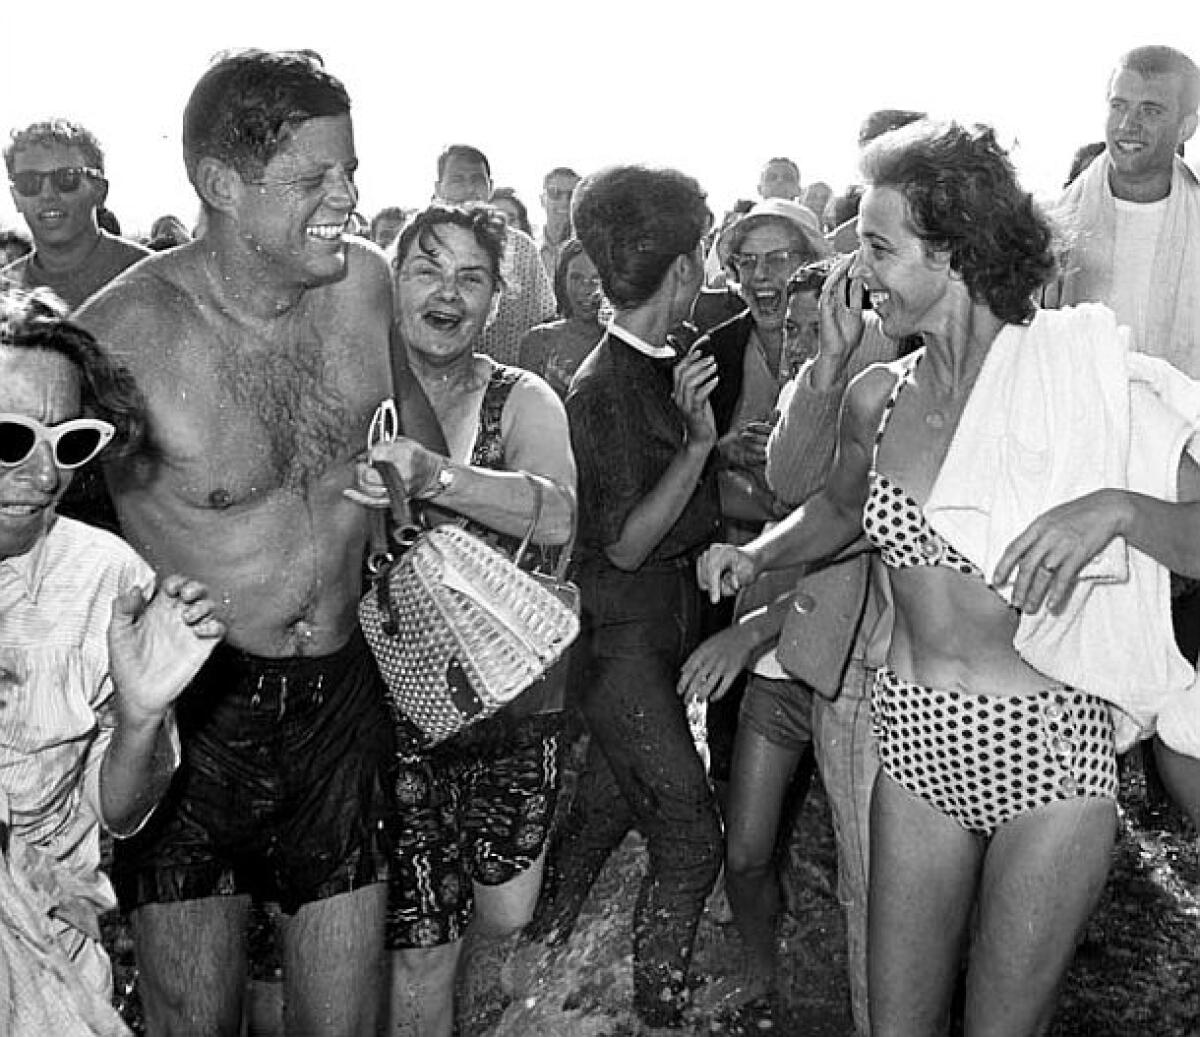 President Kennedy, third from left, is surrounded by admirers.